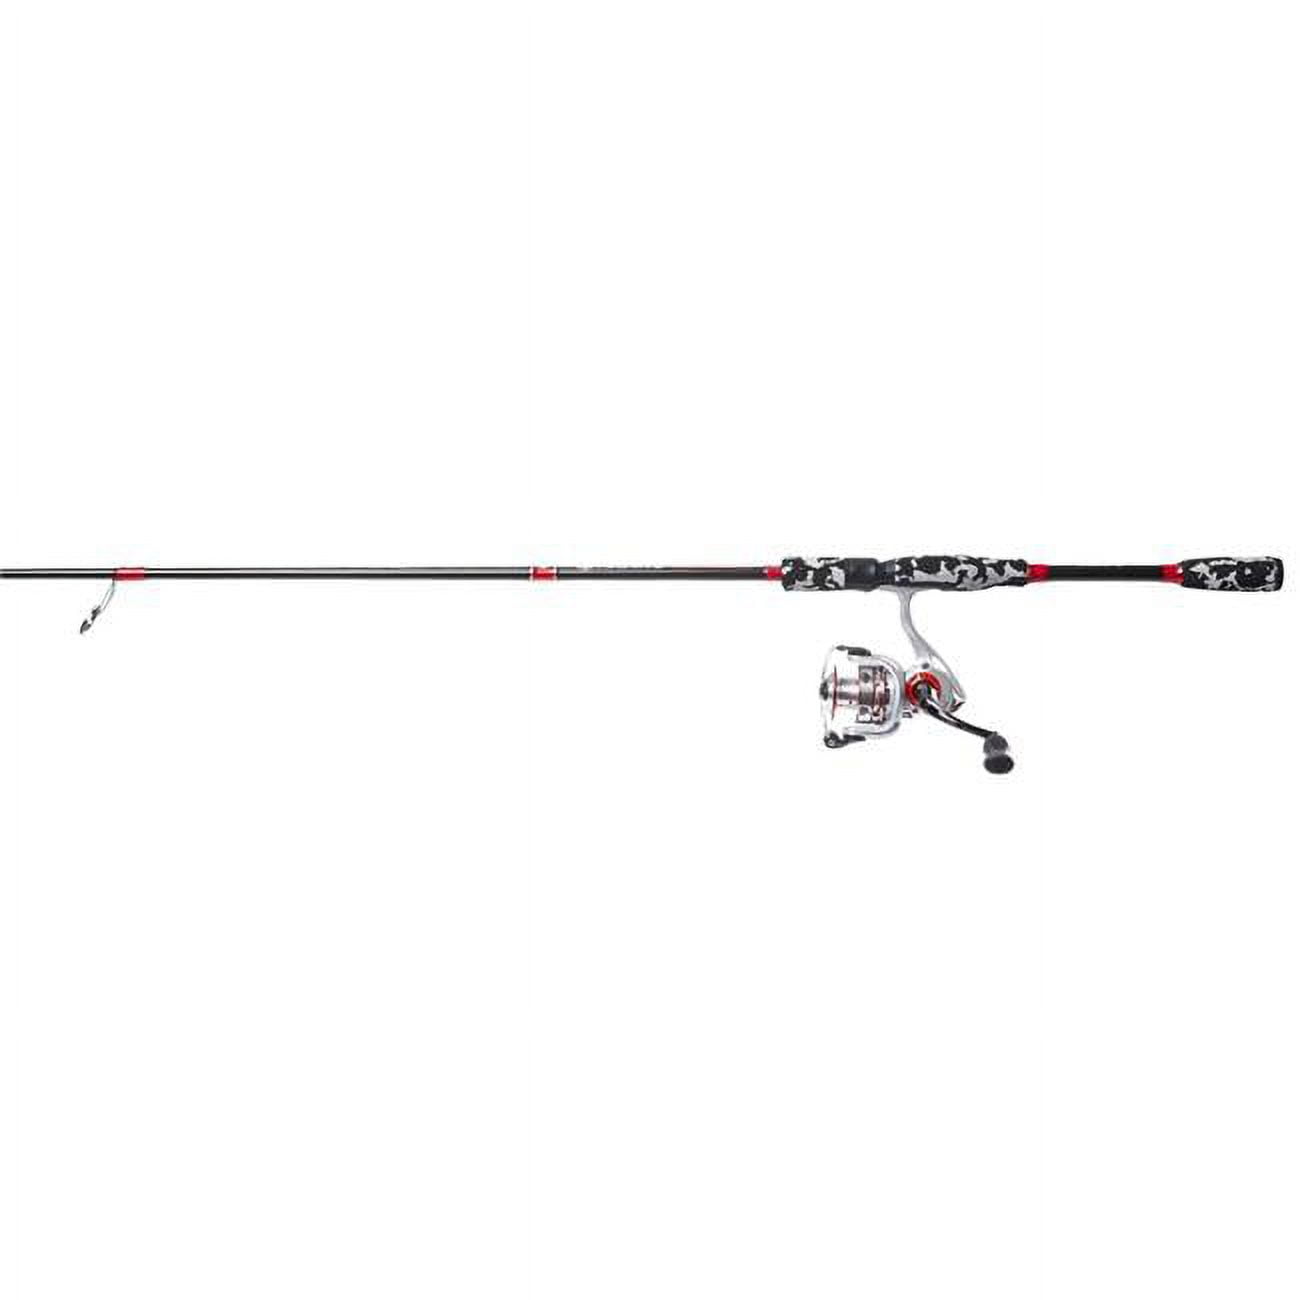 Favorite Fishing 7 ft. Favorite Army Spinning Reel Combo - 2 Piece 